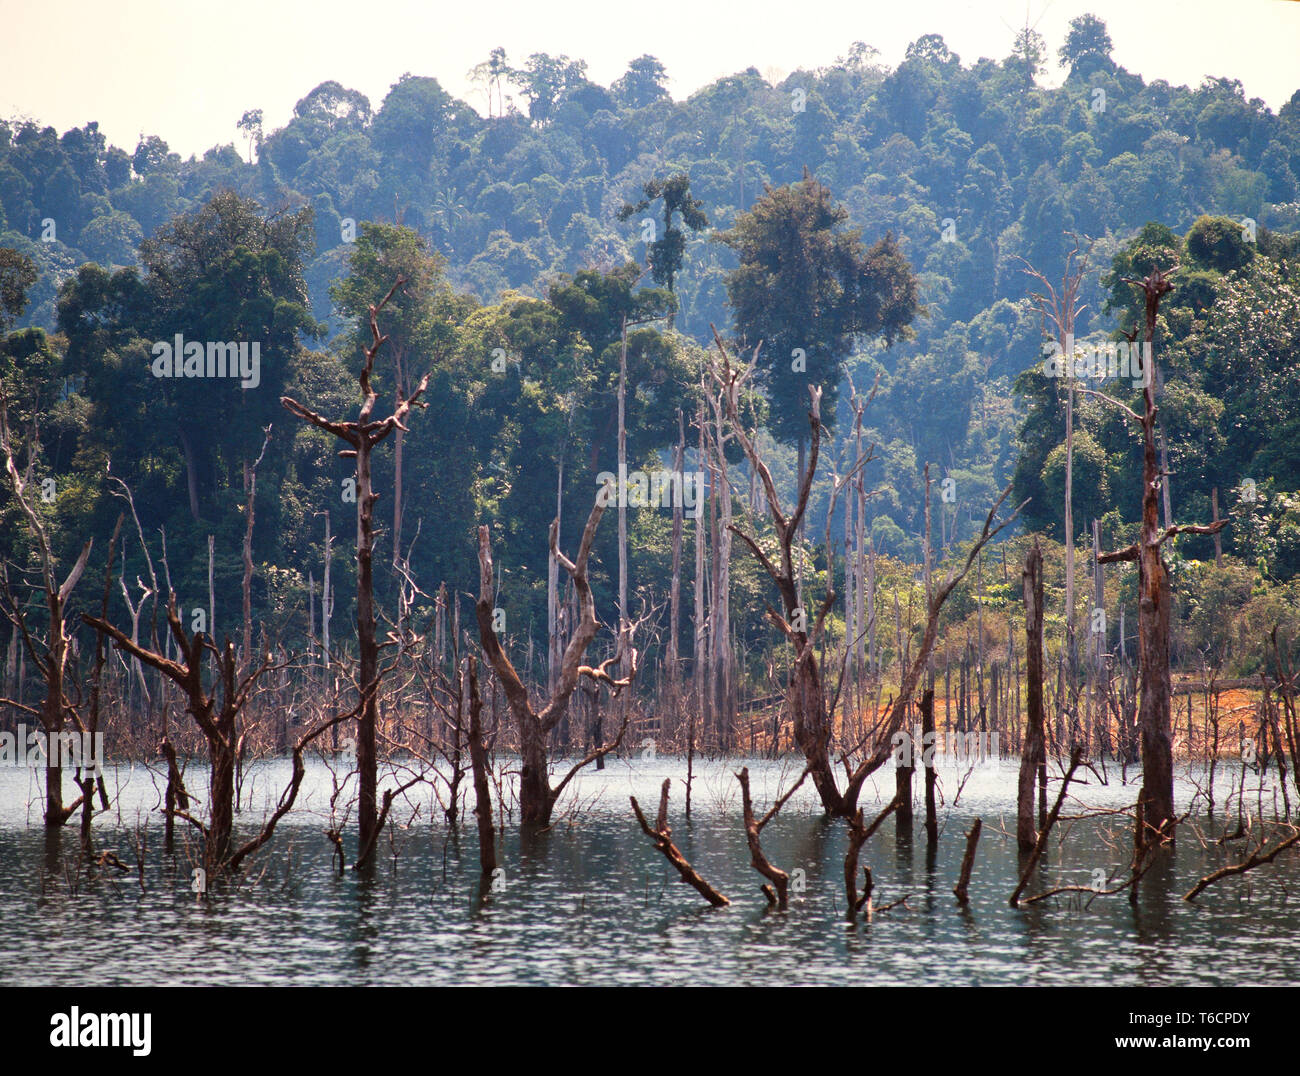 Flooded tropical forest, Lake Kenyir, Pahang, Malaysia. Stock Photo